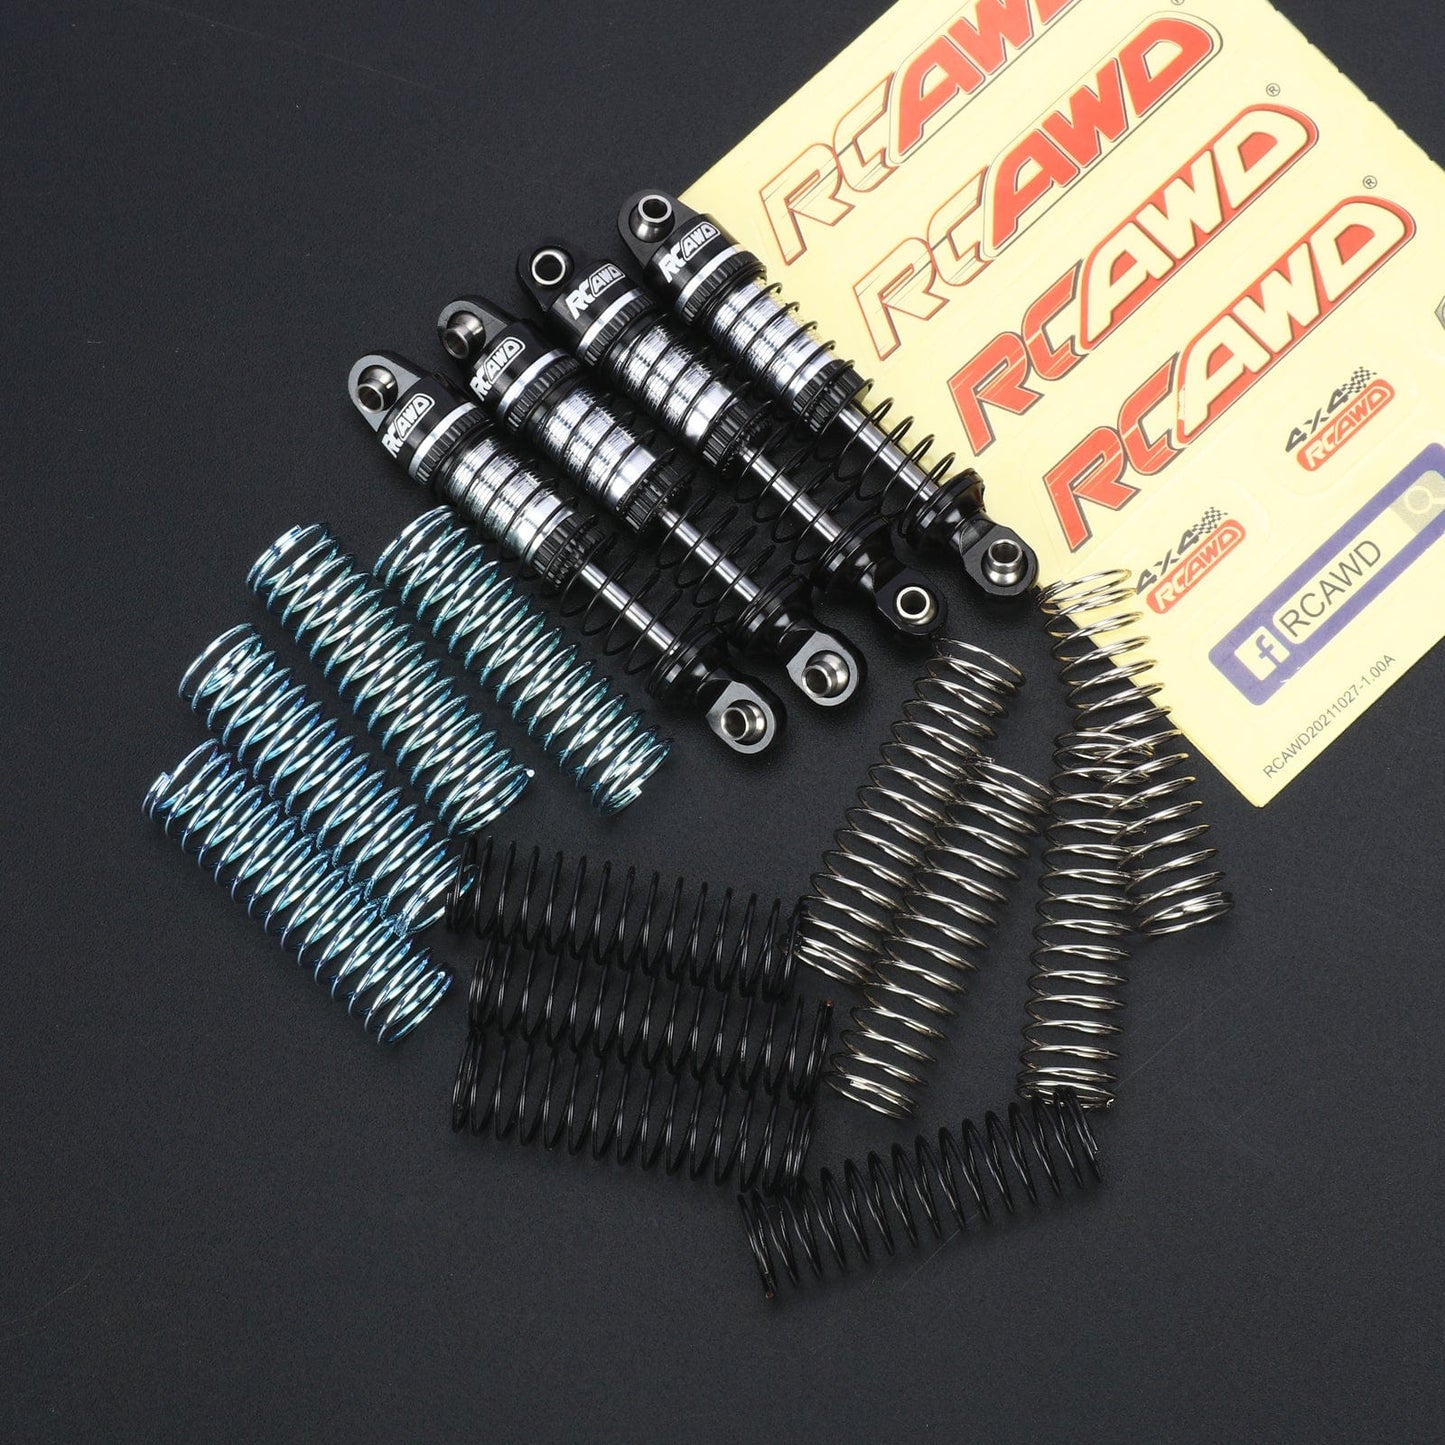 RCAWD TRXXAS TRX4M Black RCAWD 50mm Oil-fill Type Shock Absorber for Trx4m Upgrades with 3sets replacement springs